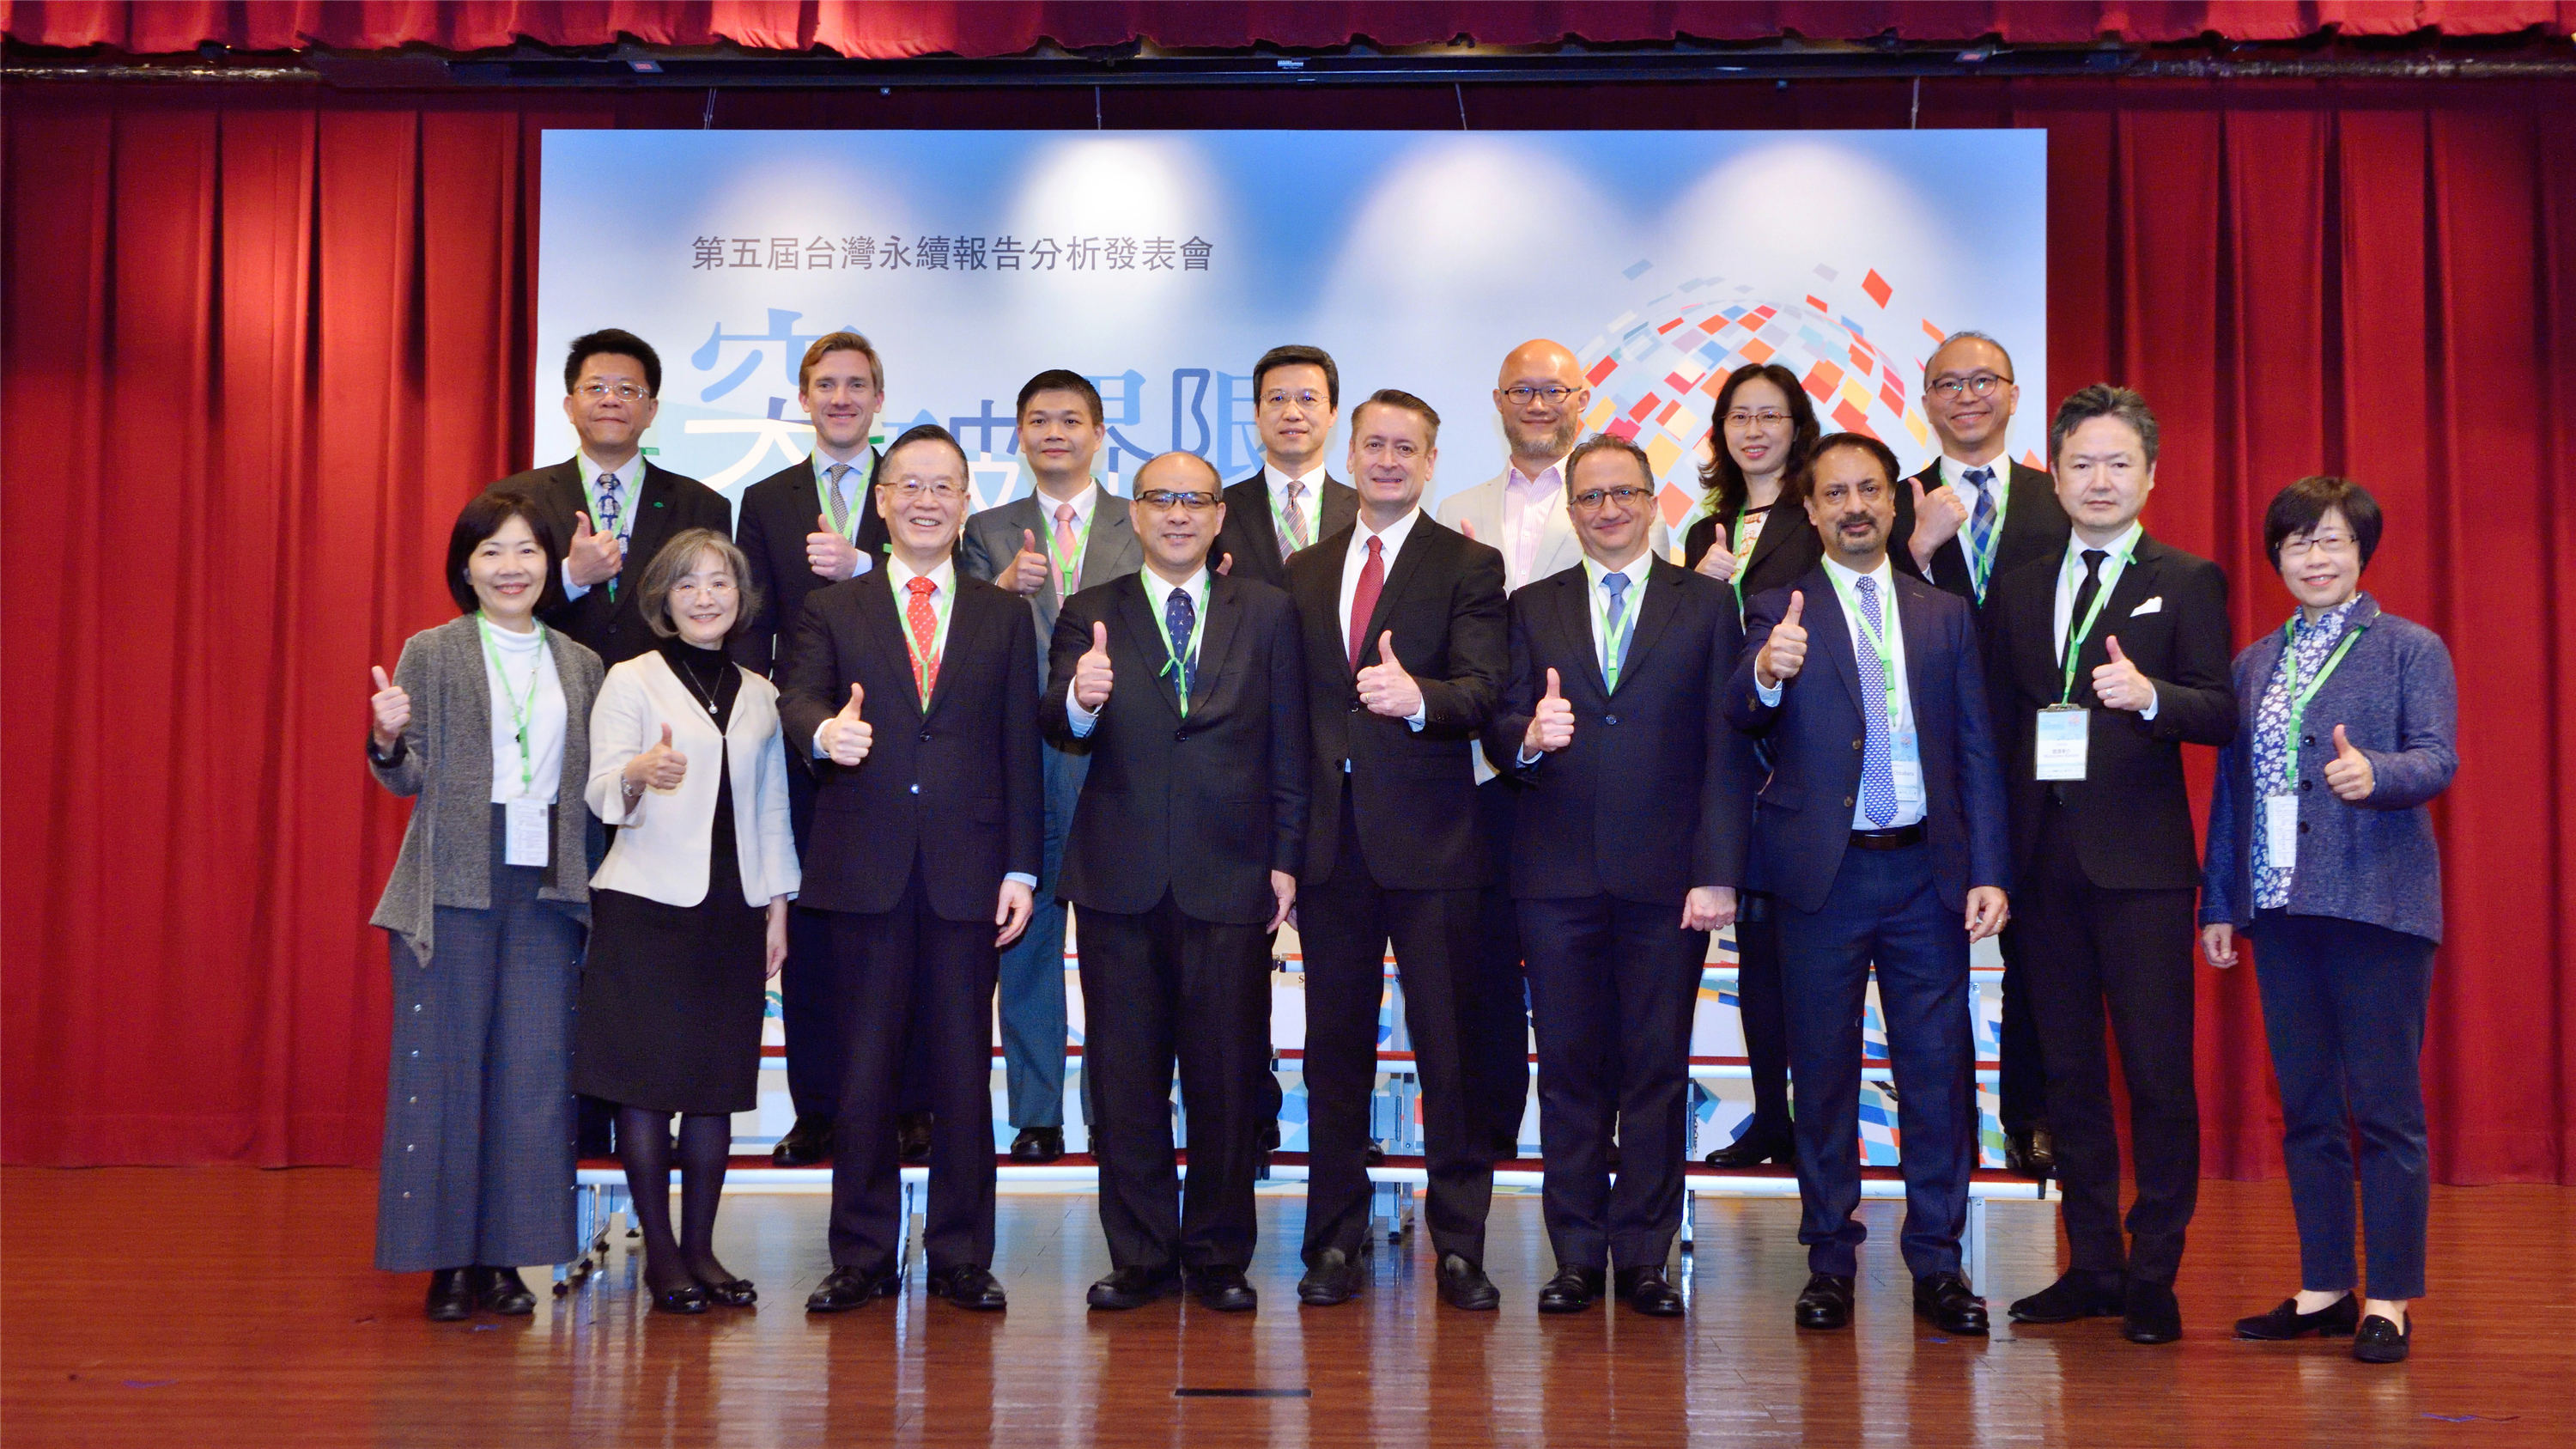 2019 Taiwan Sustainability Reporting Overview and Trends Forum